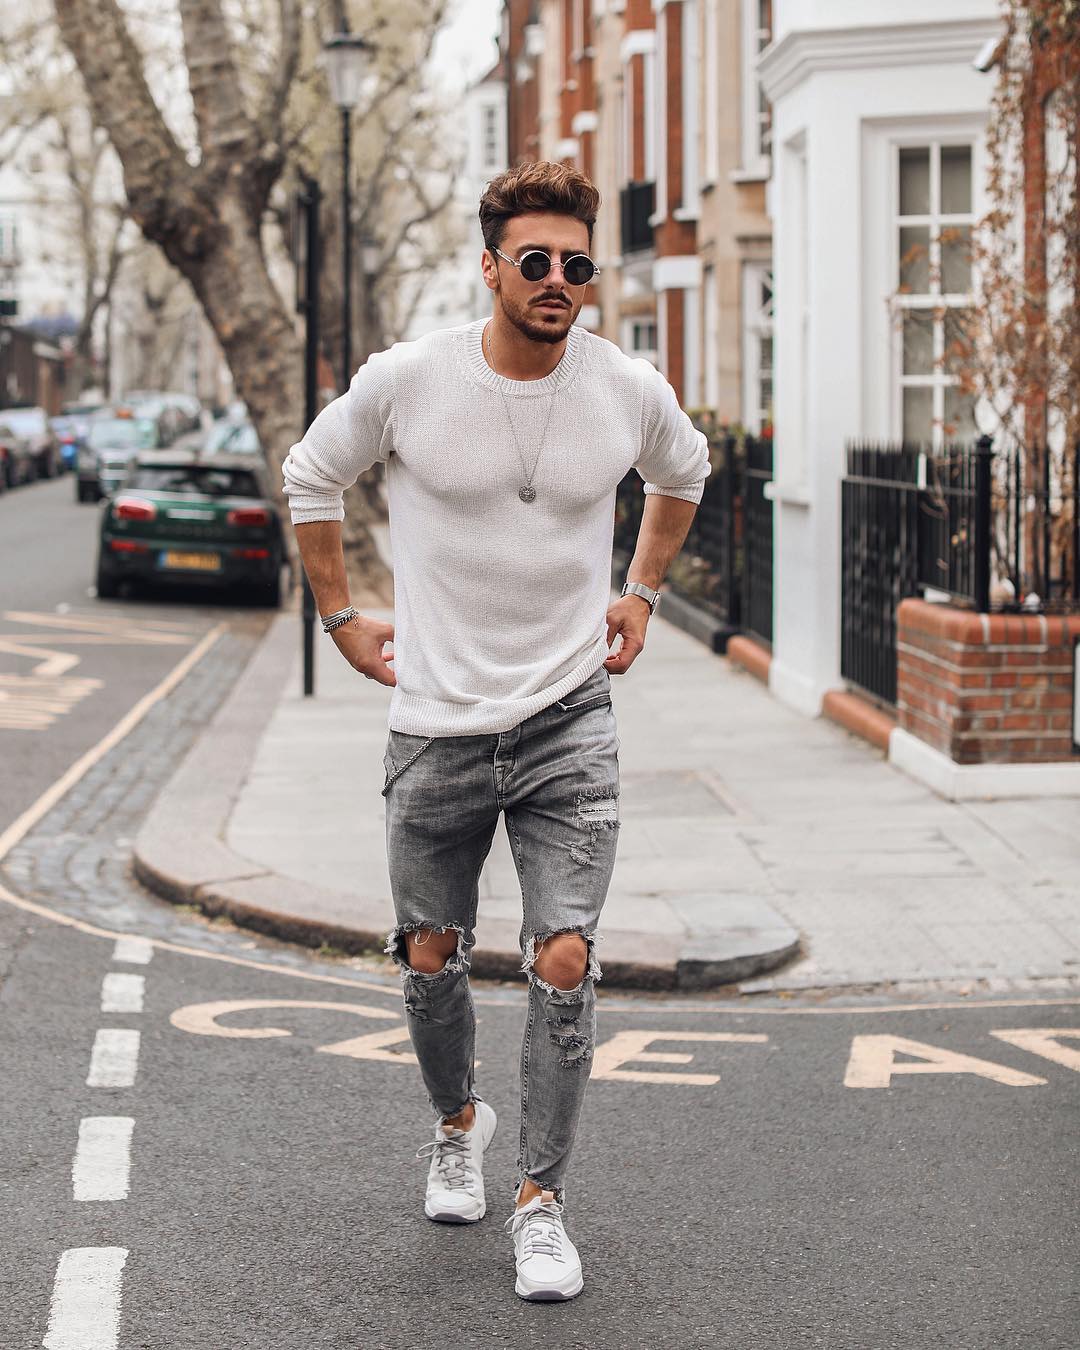 Ripped Jeans Outfit for men - Page 16 of 20 - Fashion Inspiration and ...